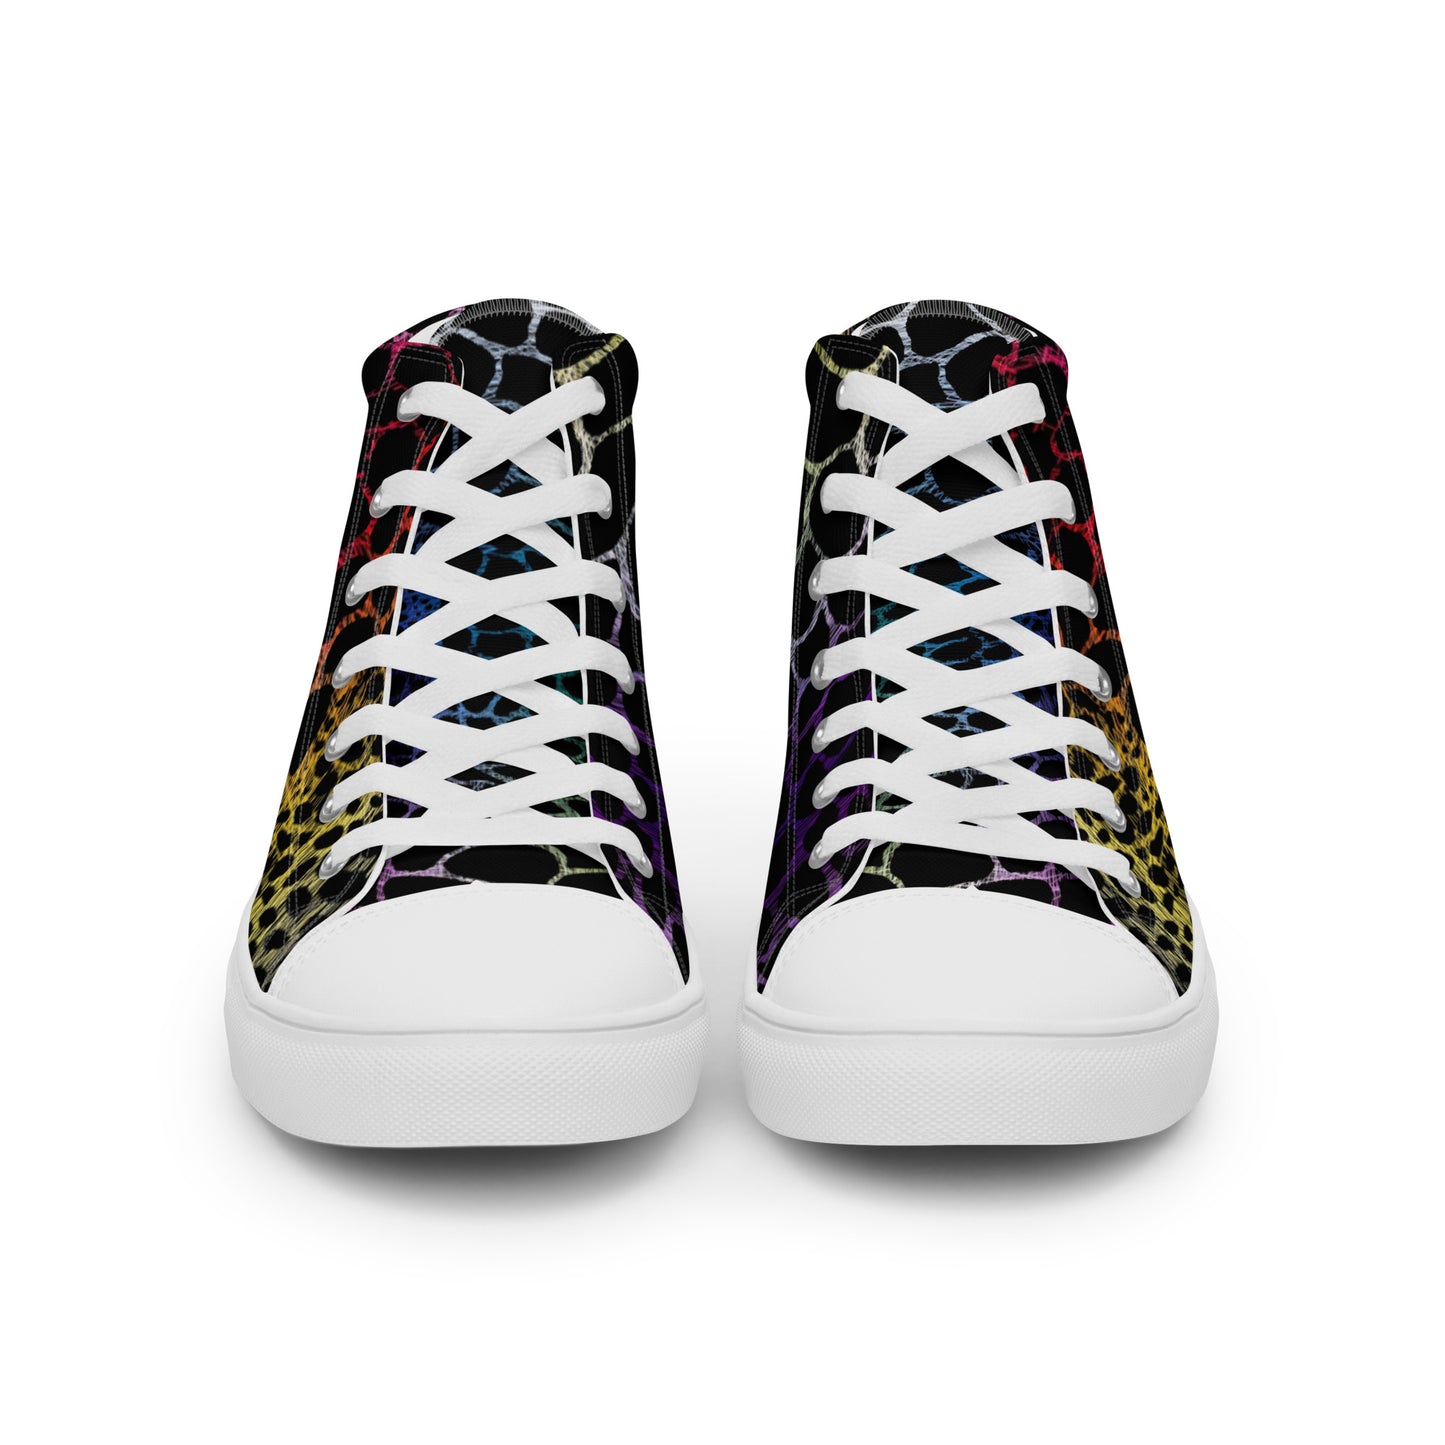 Wild Rainbow Outline Women’s High Top Canvas Shoes | Casual Print Shoes | Stylish Festival Sneakers | LGBTQ+ Shoes | Lace Up Sneakers | - Comfortable Culture - Shoes - Comfortable Culture